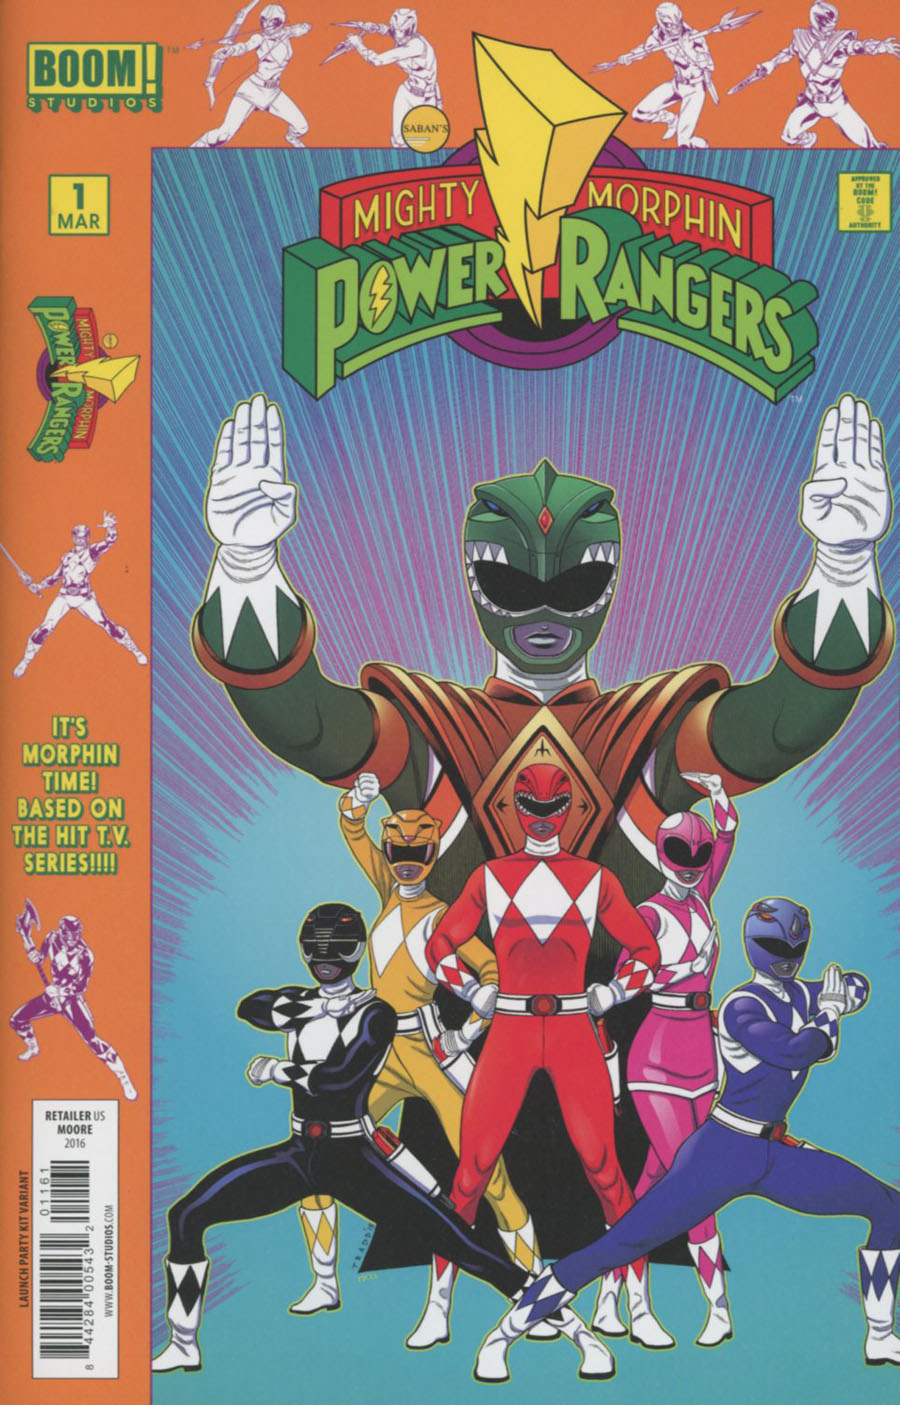 Mighty Morphin Power Rangers (BOOM Studios) #1 Cover E Variant Launch Party Cover